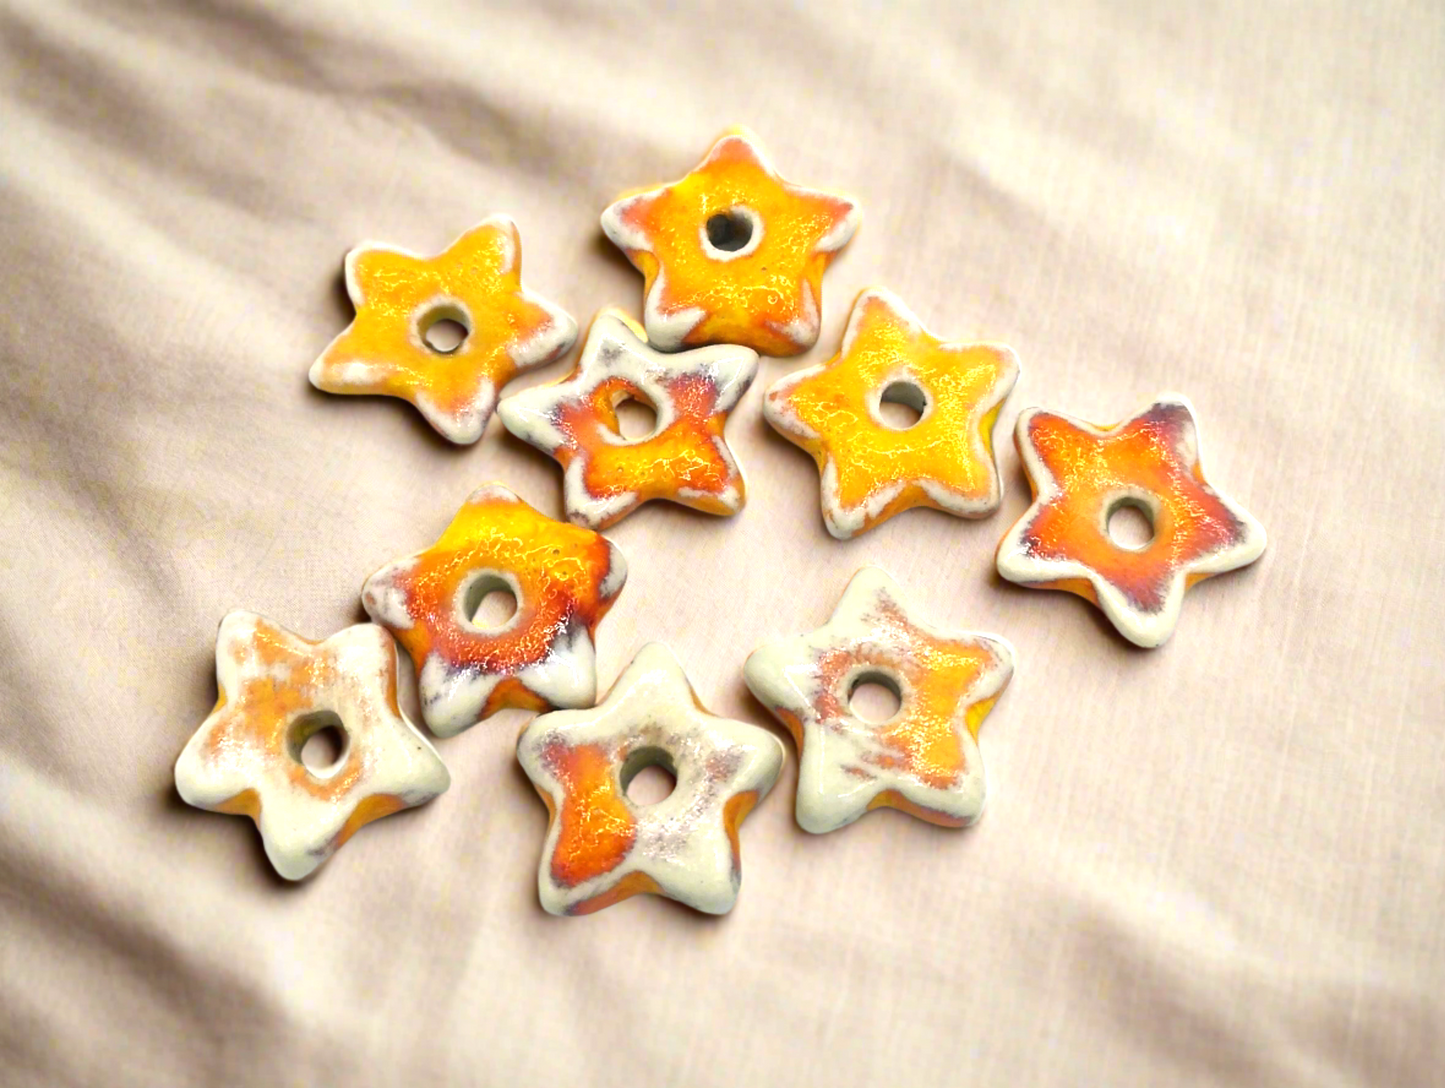 9Pc 15mm Orange Tiny Star Beads, Handmade Ceramic Macrame Beads, Mini Star Charms For Jewelry Making, Spacer Beads, Unique Clay Beads